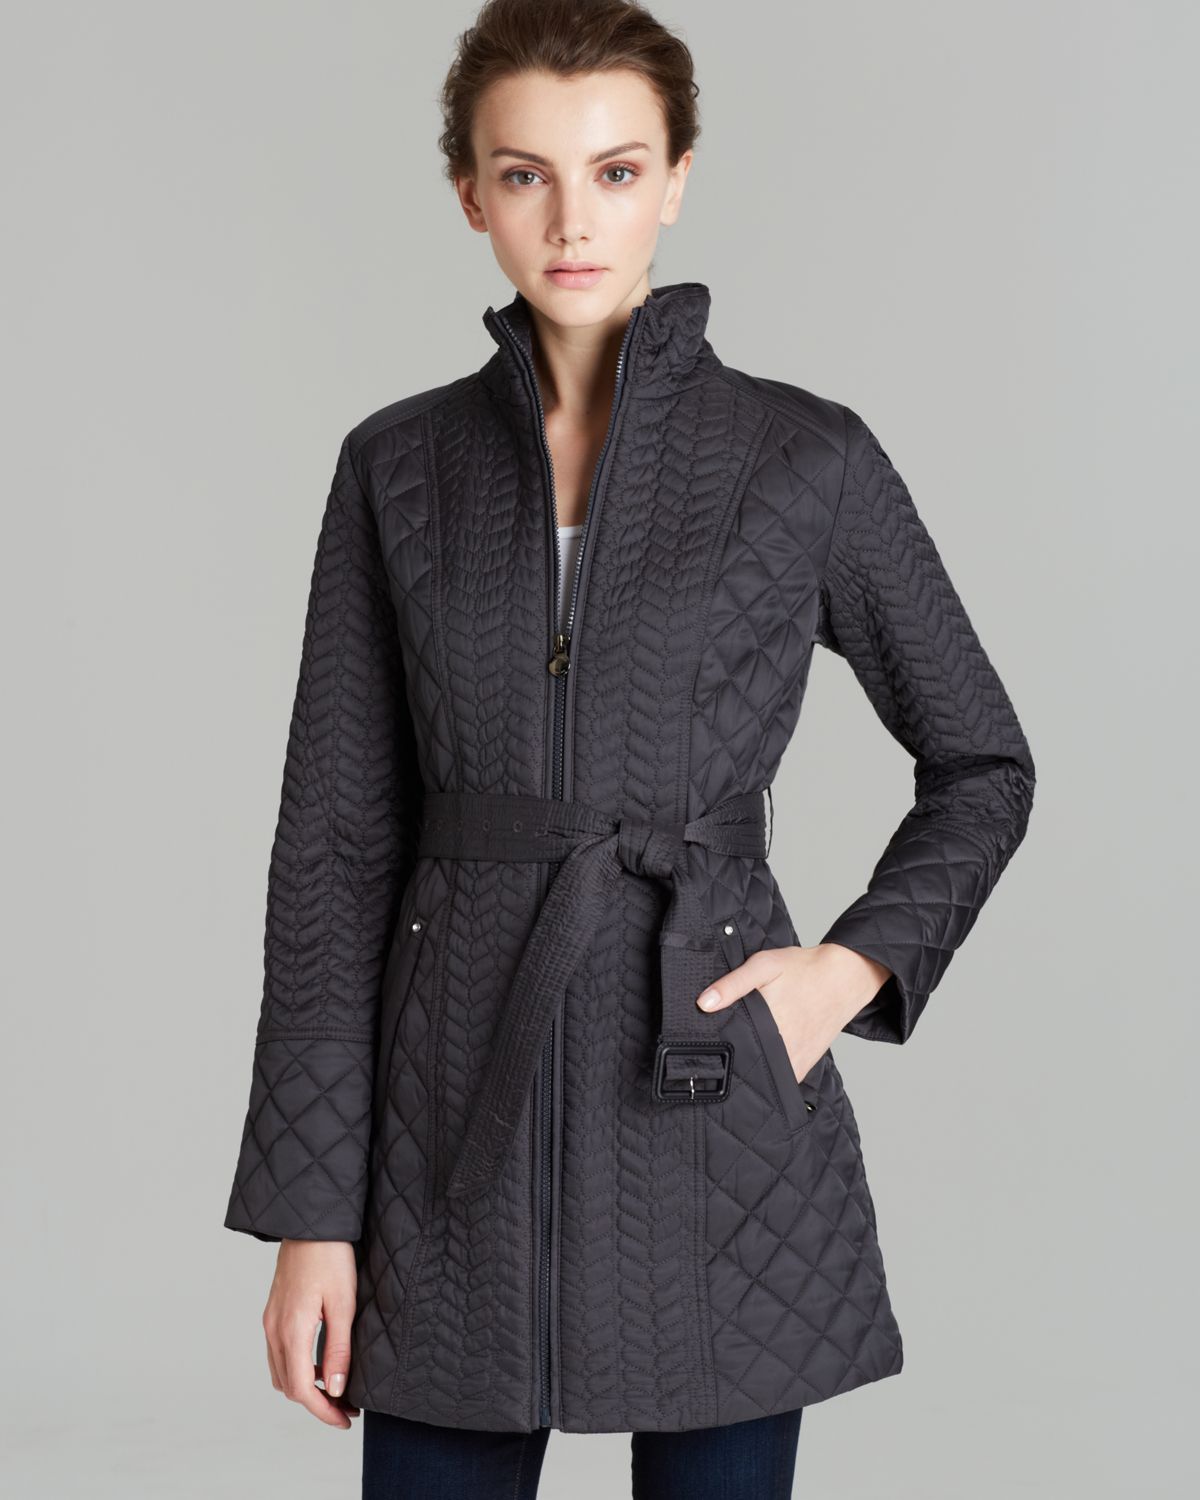 Laundry by shelli segal Rain Coat Quilt Belted in Gray | Lyst